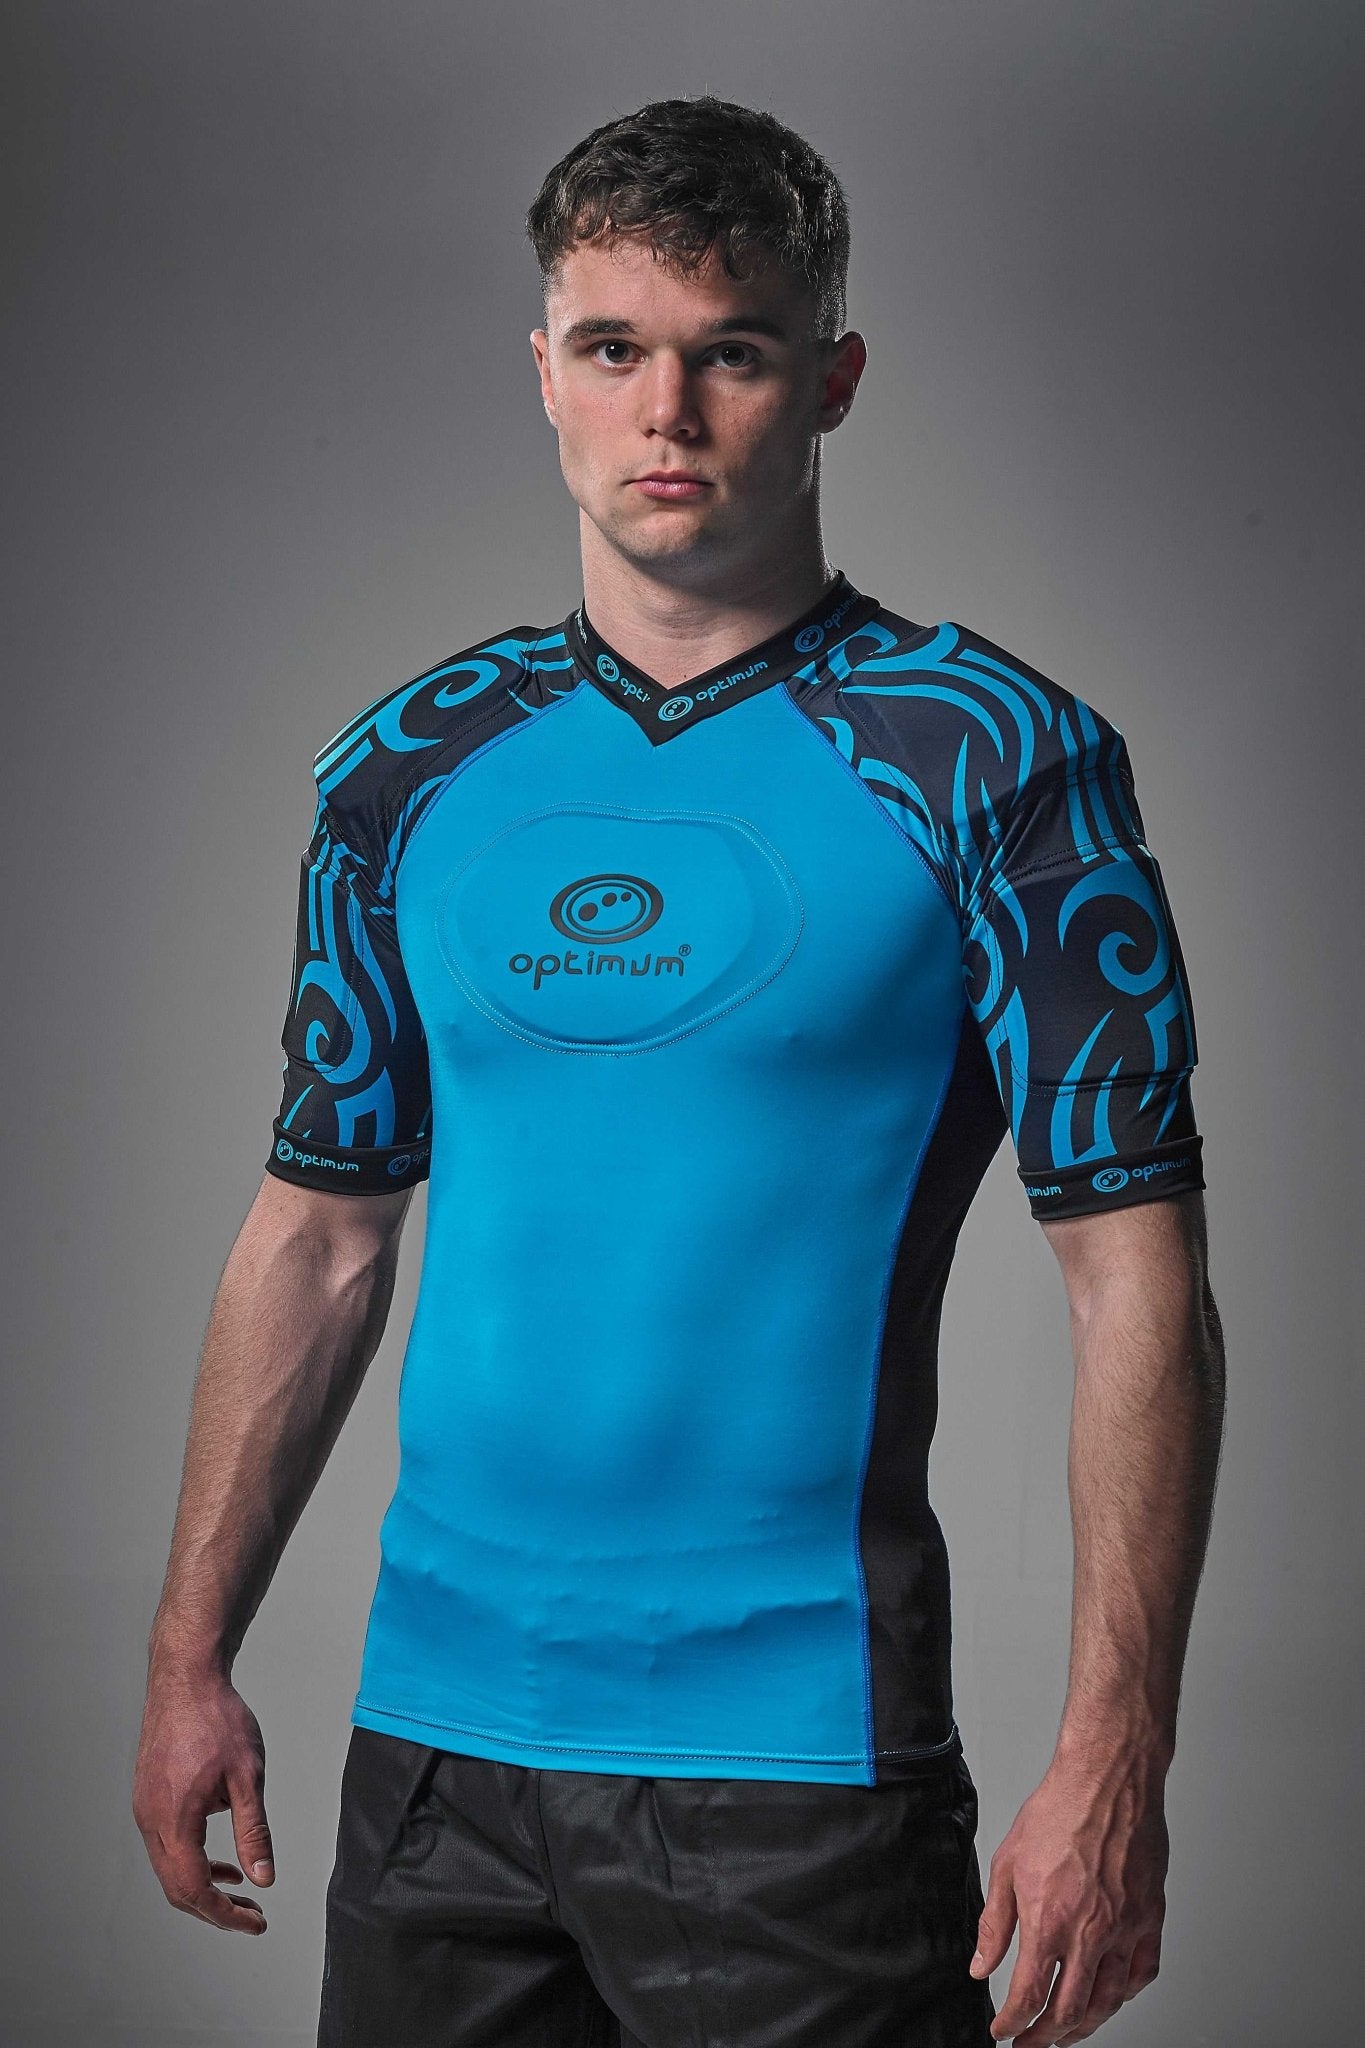 Razor Protective Top Sports Gear Training Outfit - Optimum